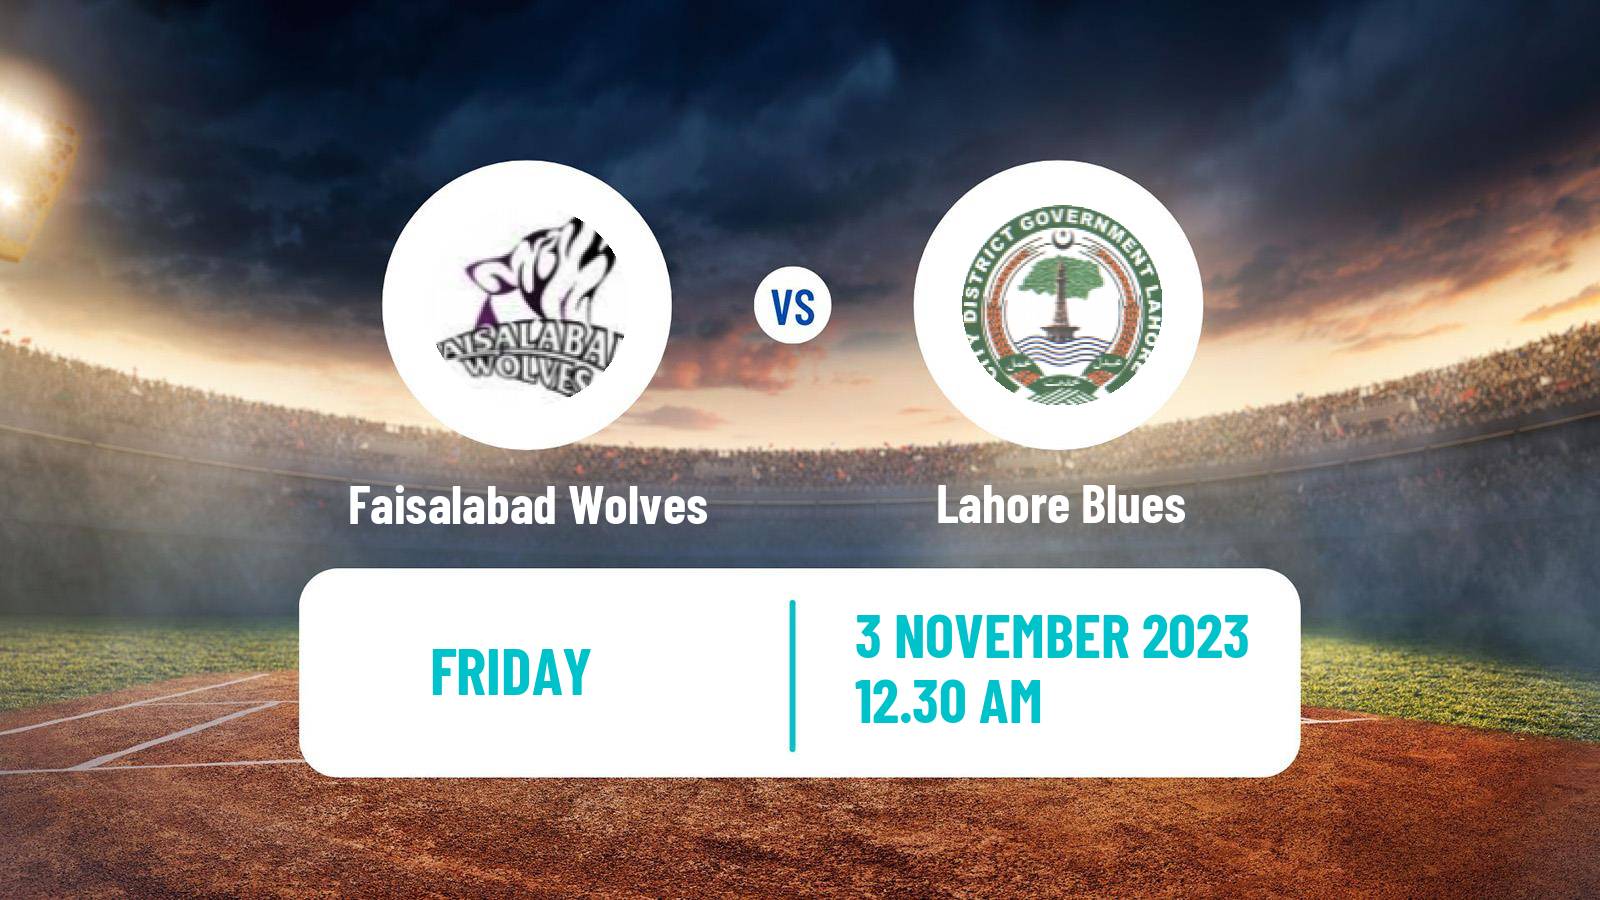 Cricket Pakistan One Day Cup Faisalabad Wolves - Lahore Blues